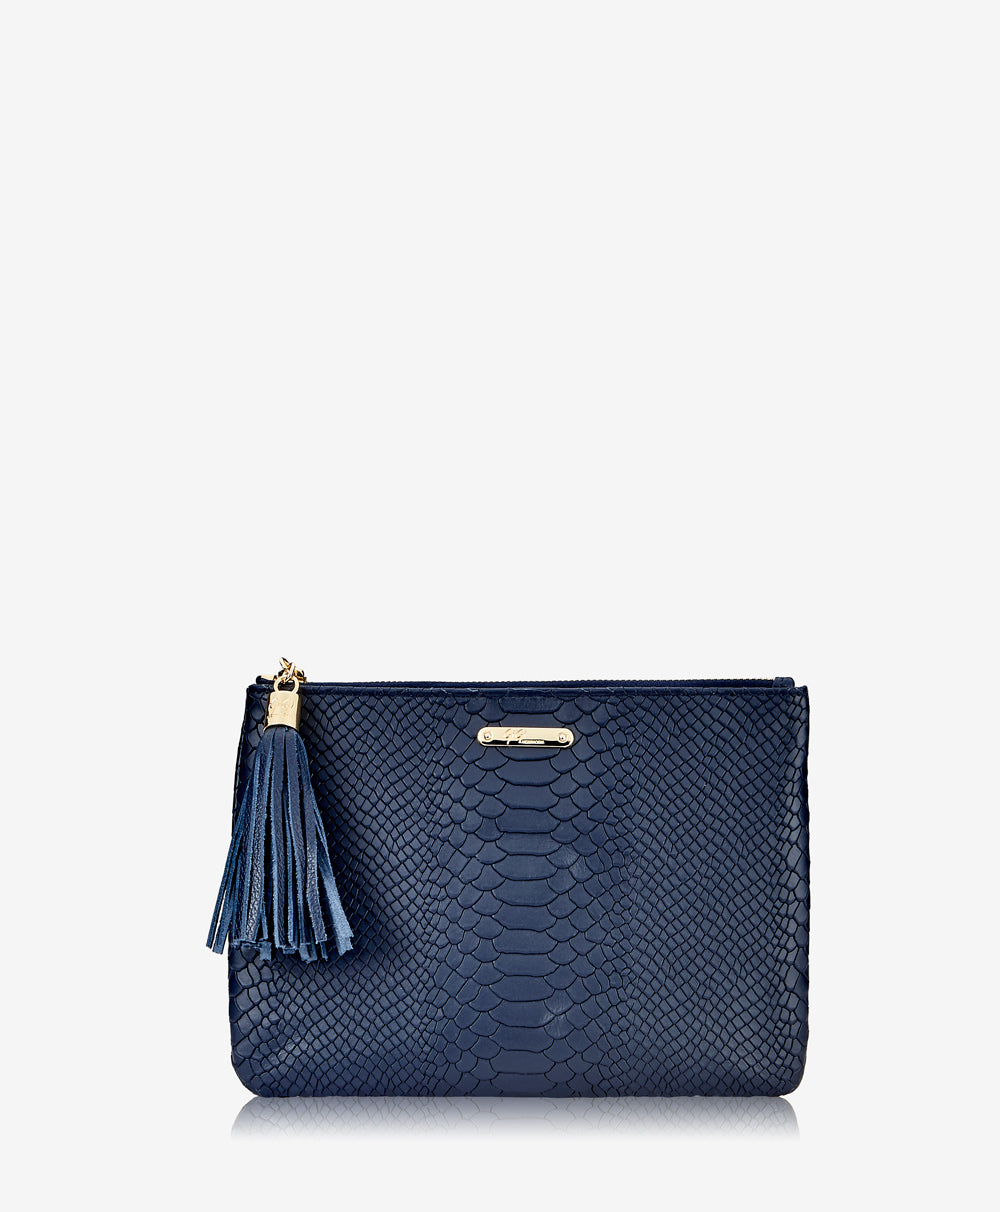 GiGi New York All In One Clutch Bag Navy Embossed Python Leather